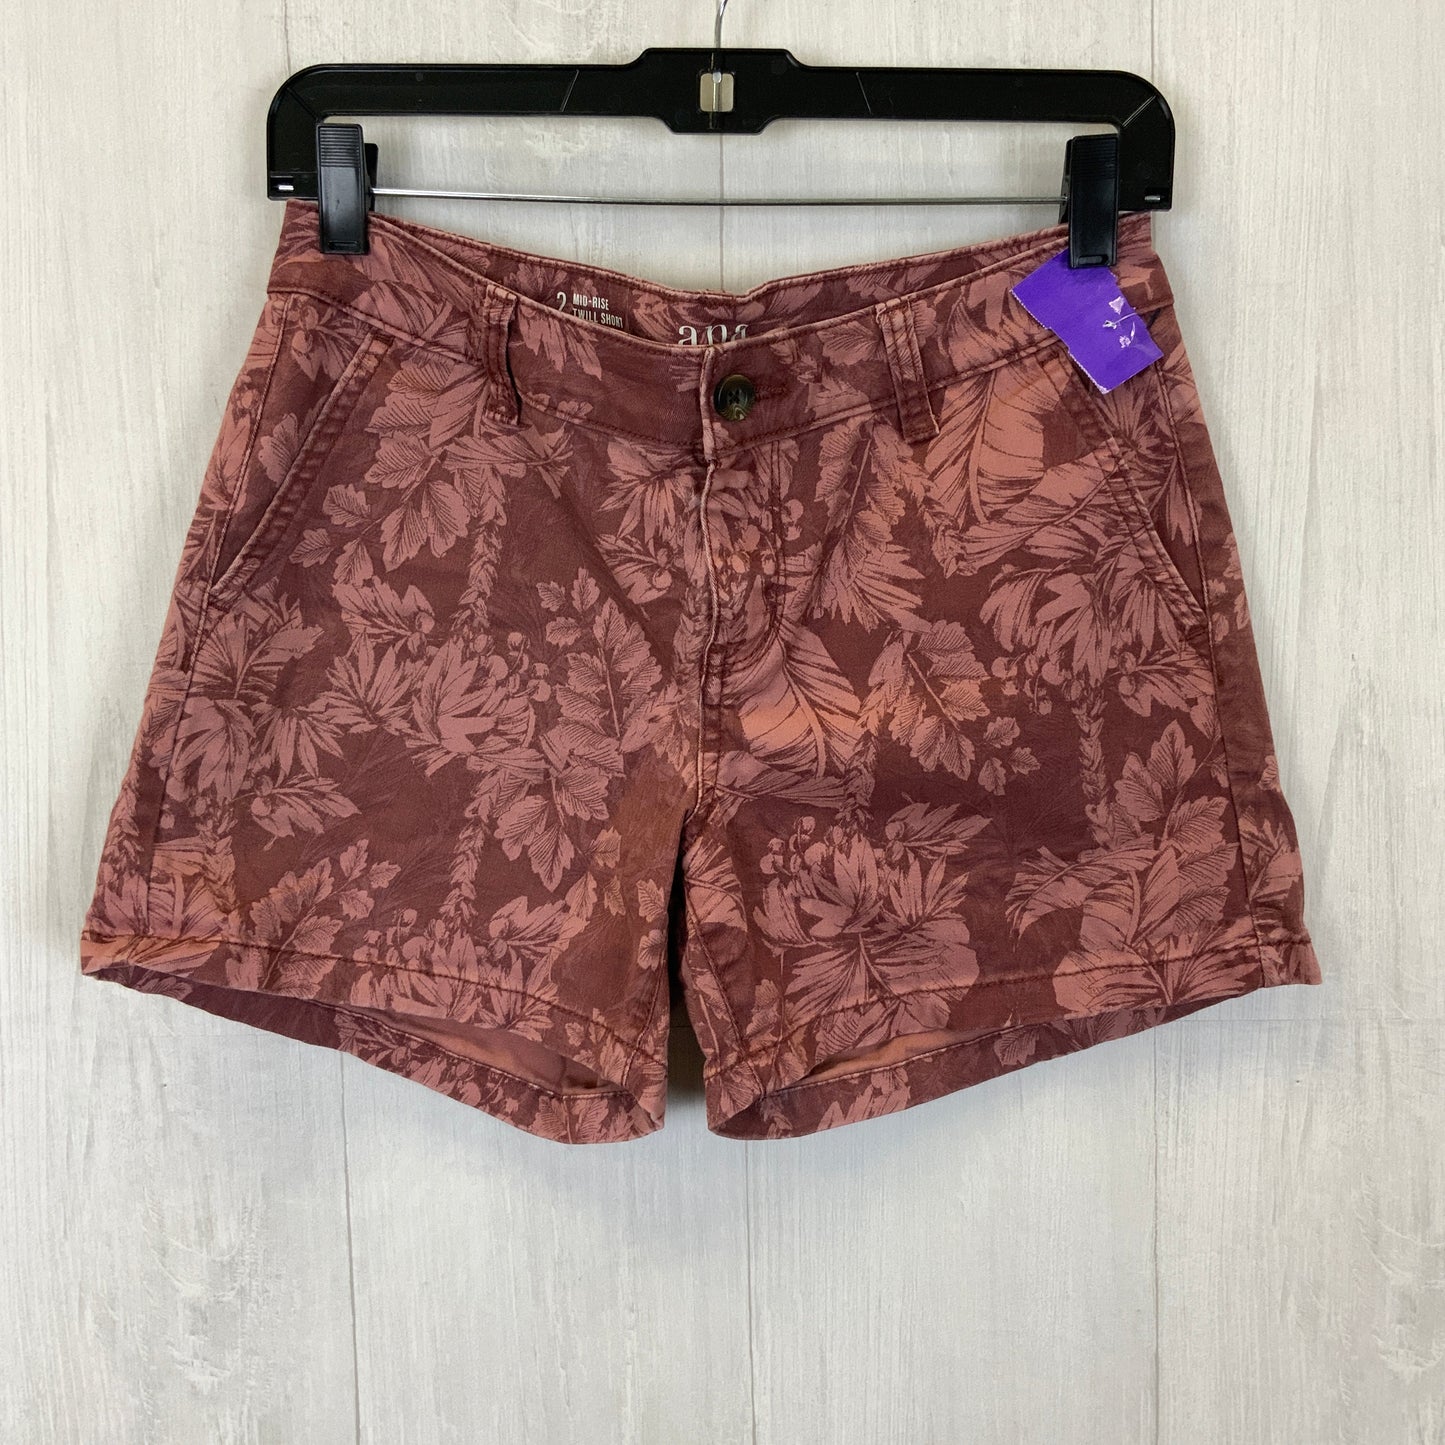 Red Shorts Ana, Size 2